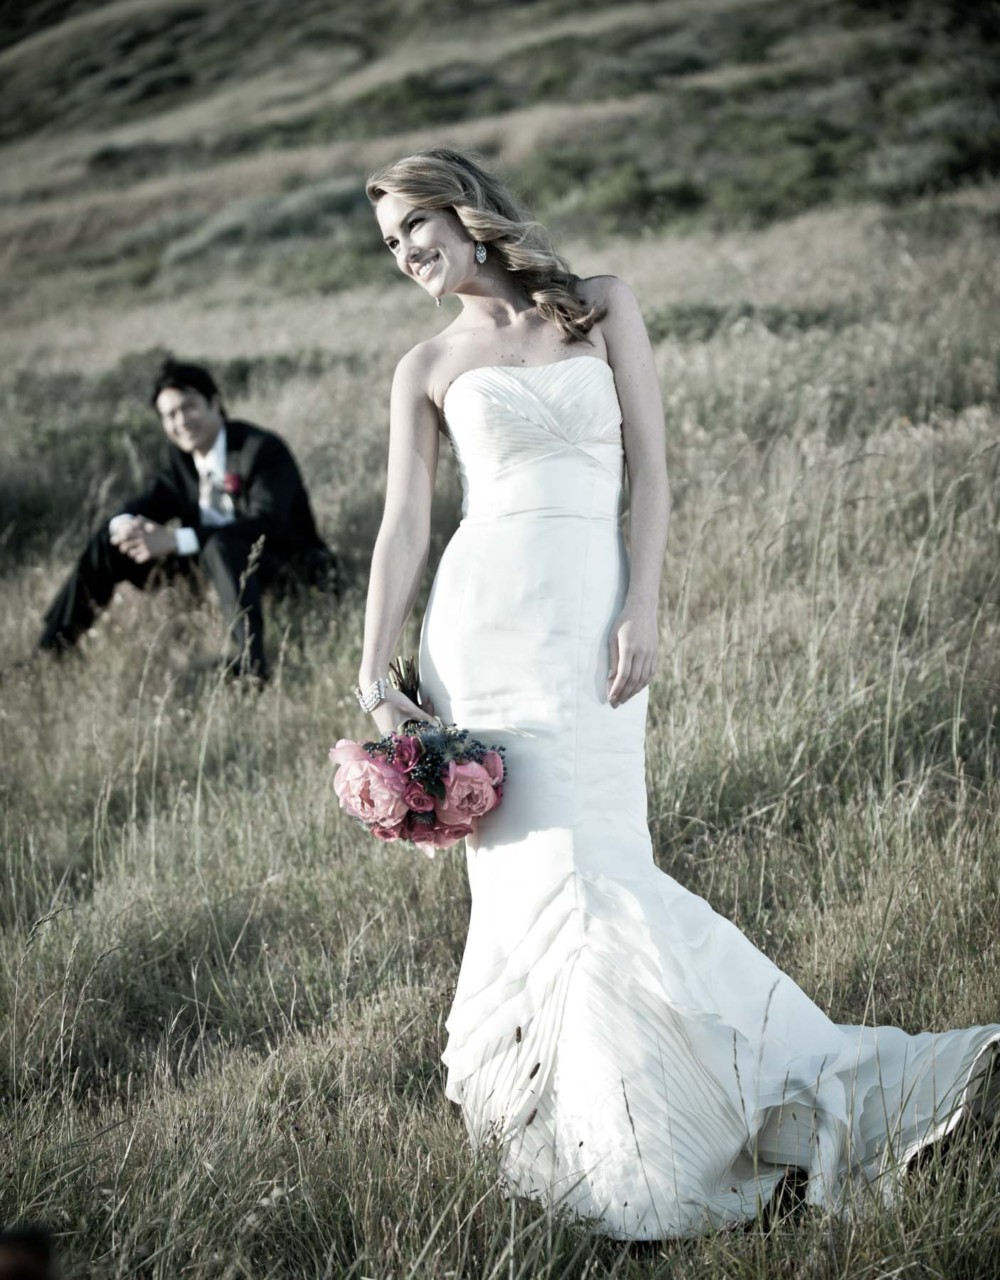 Looking for a summer wedding photographer in Big Lake?